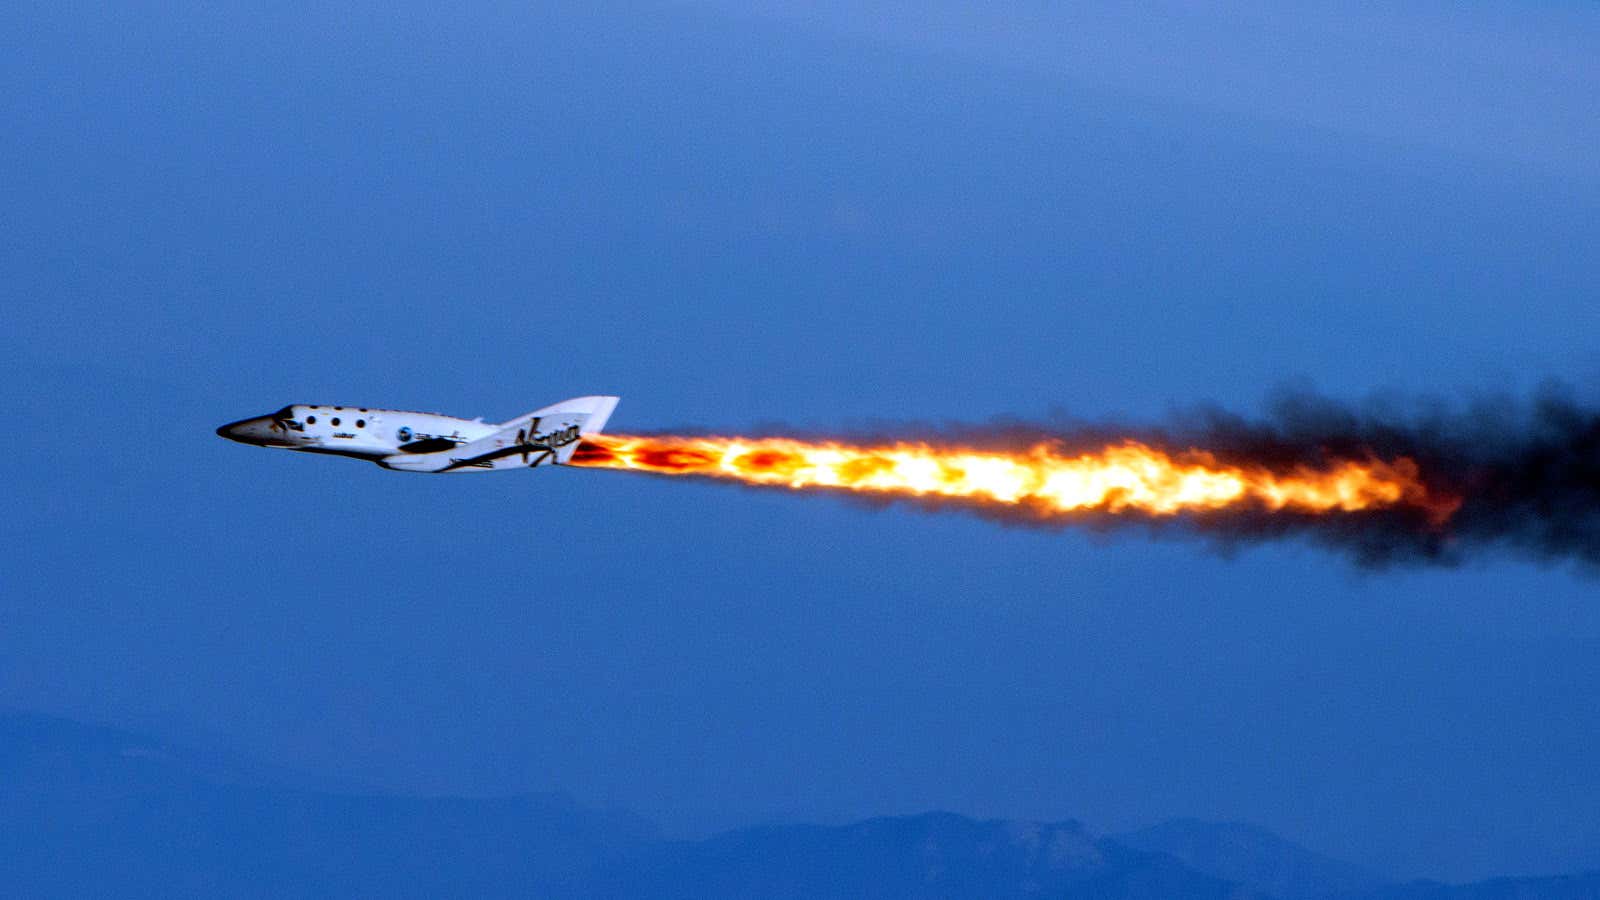 SpaceShipTwo flying in February 2014.